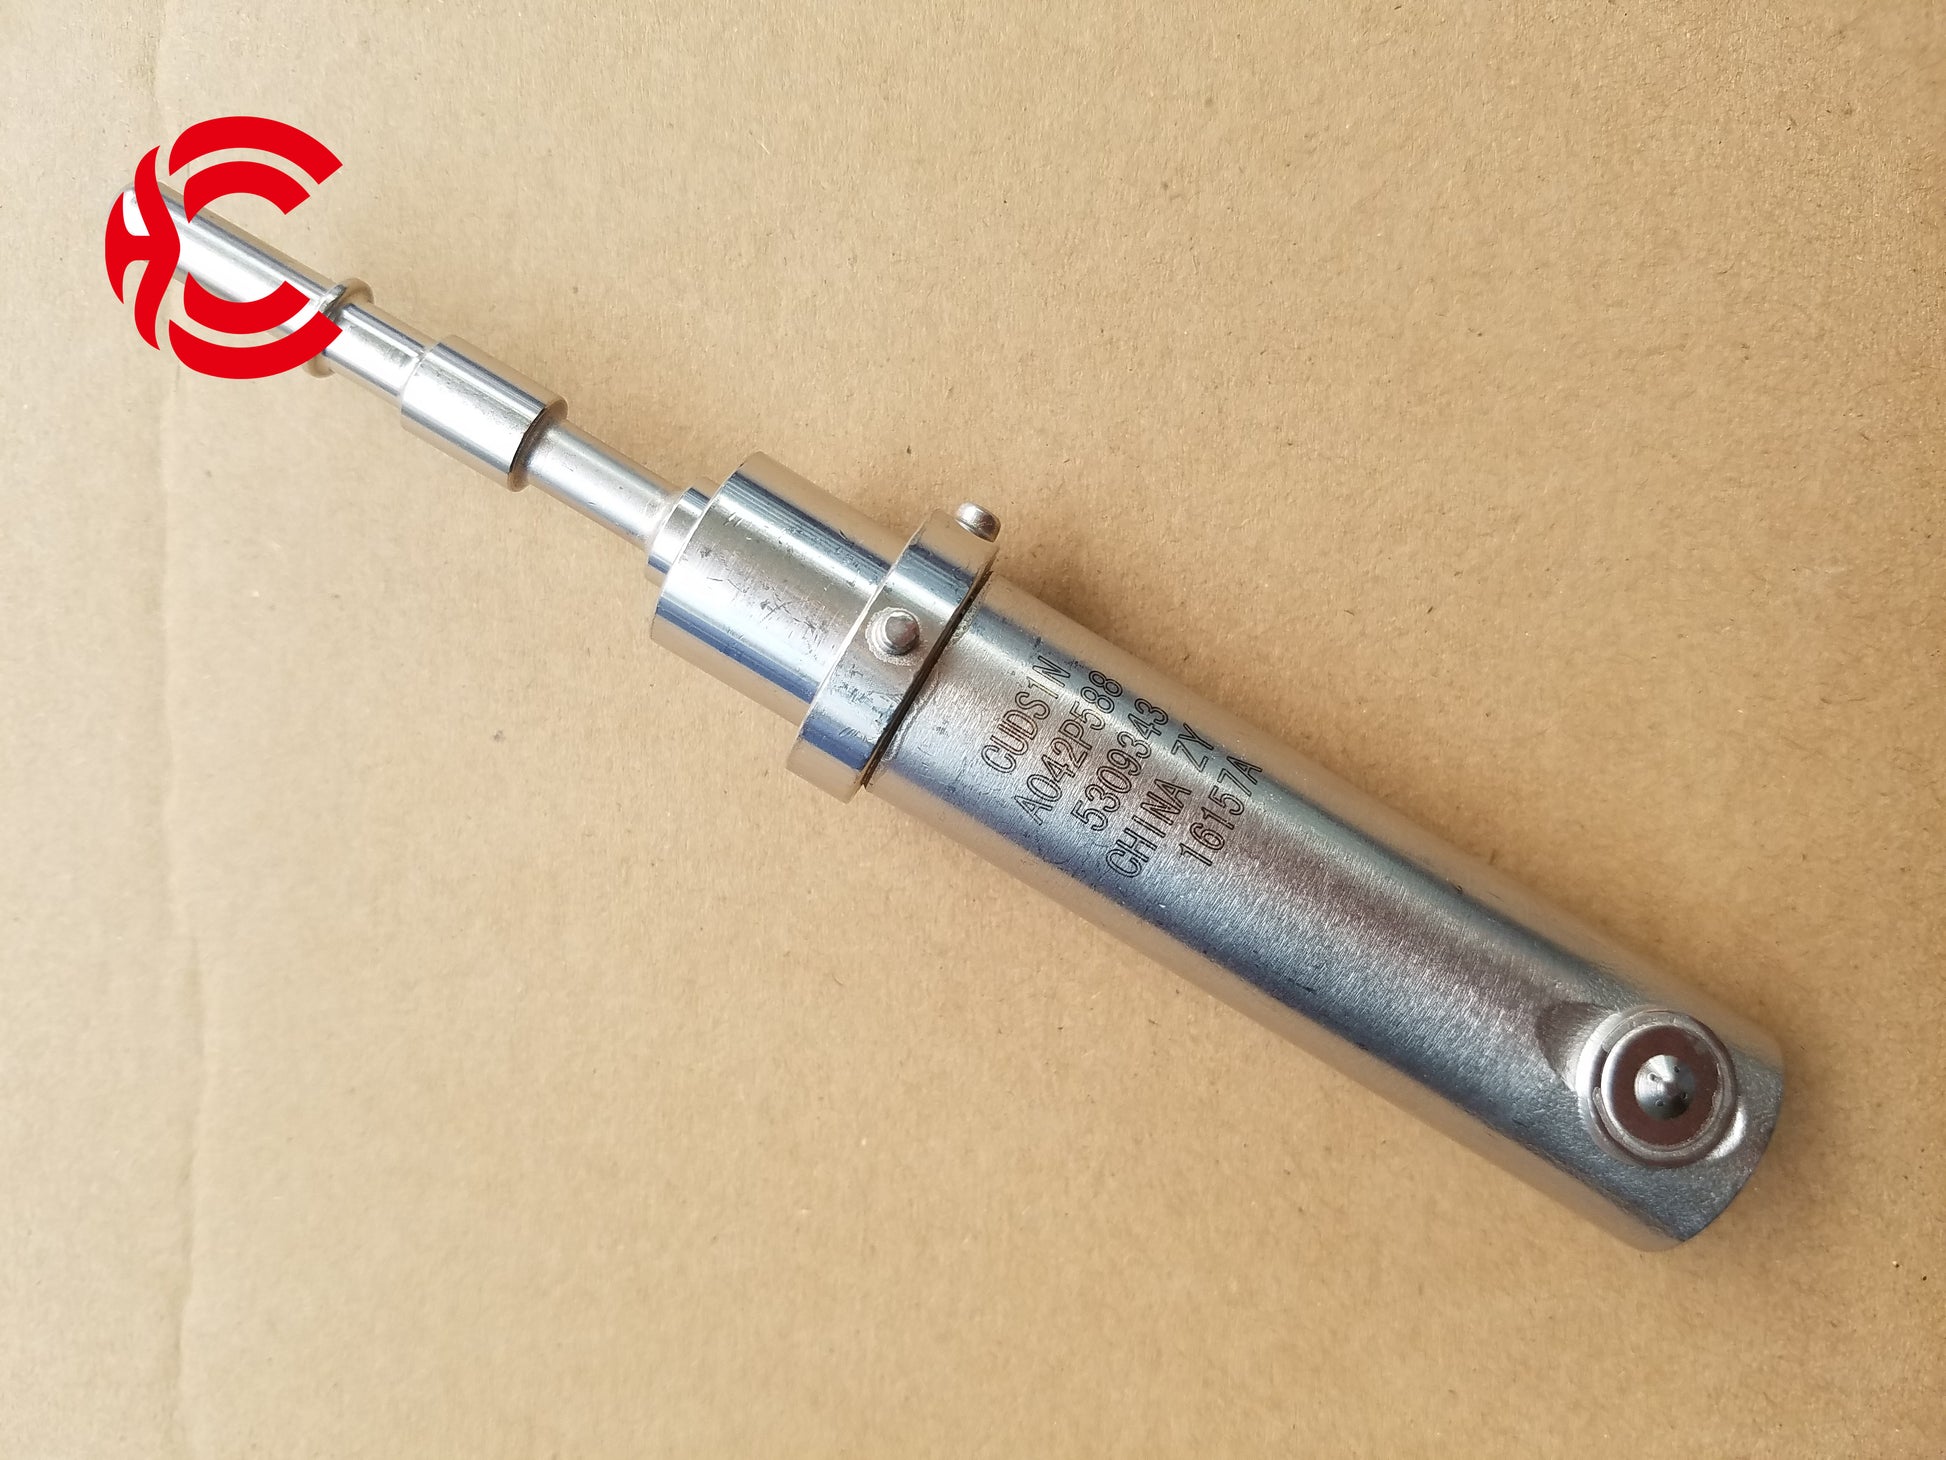 OEM: A042P588 5309343 1205750-T39H0Material: MetalColor: SilverOrigin: Made in ChinaWeight: 200gPacking List: 1* Adblue/Urea Nozzle More ServiceWe can provide OEM Manufacturing serviceWe can Be your one-step solution for Auto PartsWe can provide technical scheme for you Feel Free to Contact Us, We will get back to you as soon as possible.